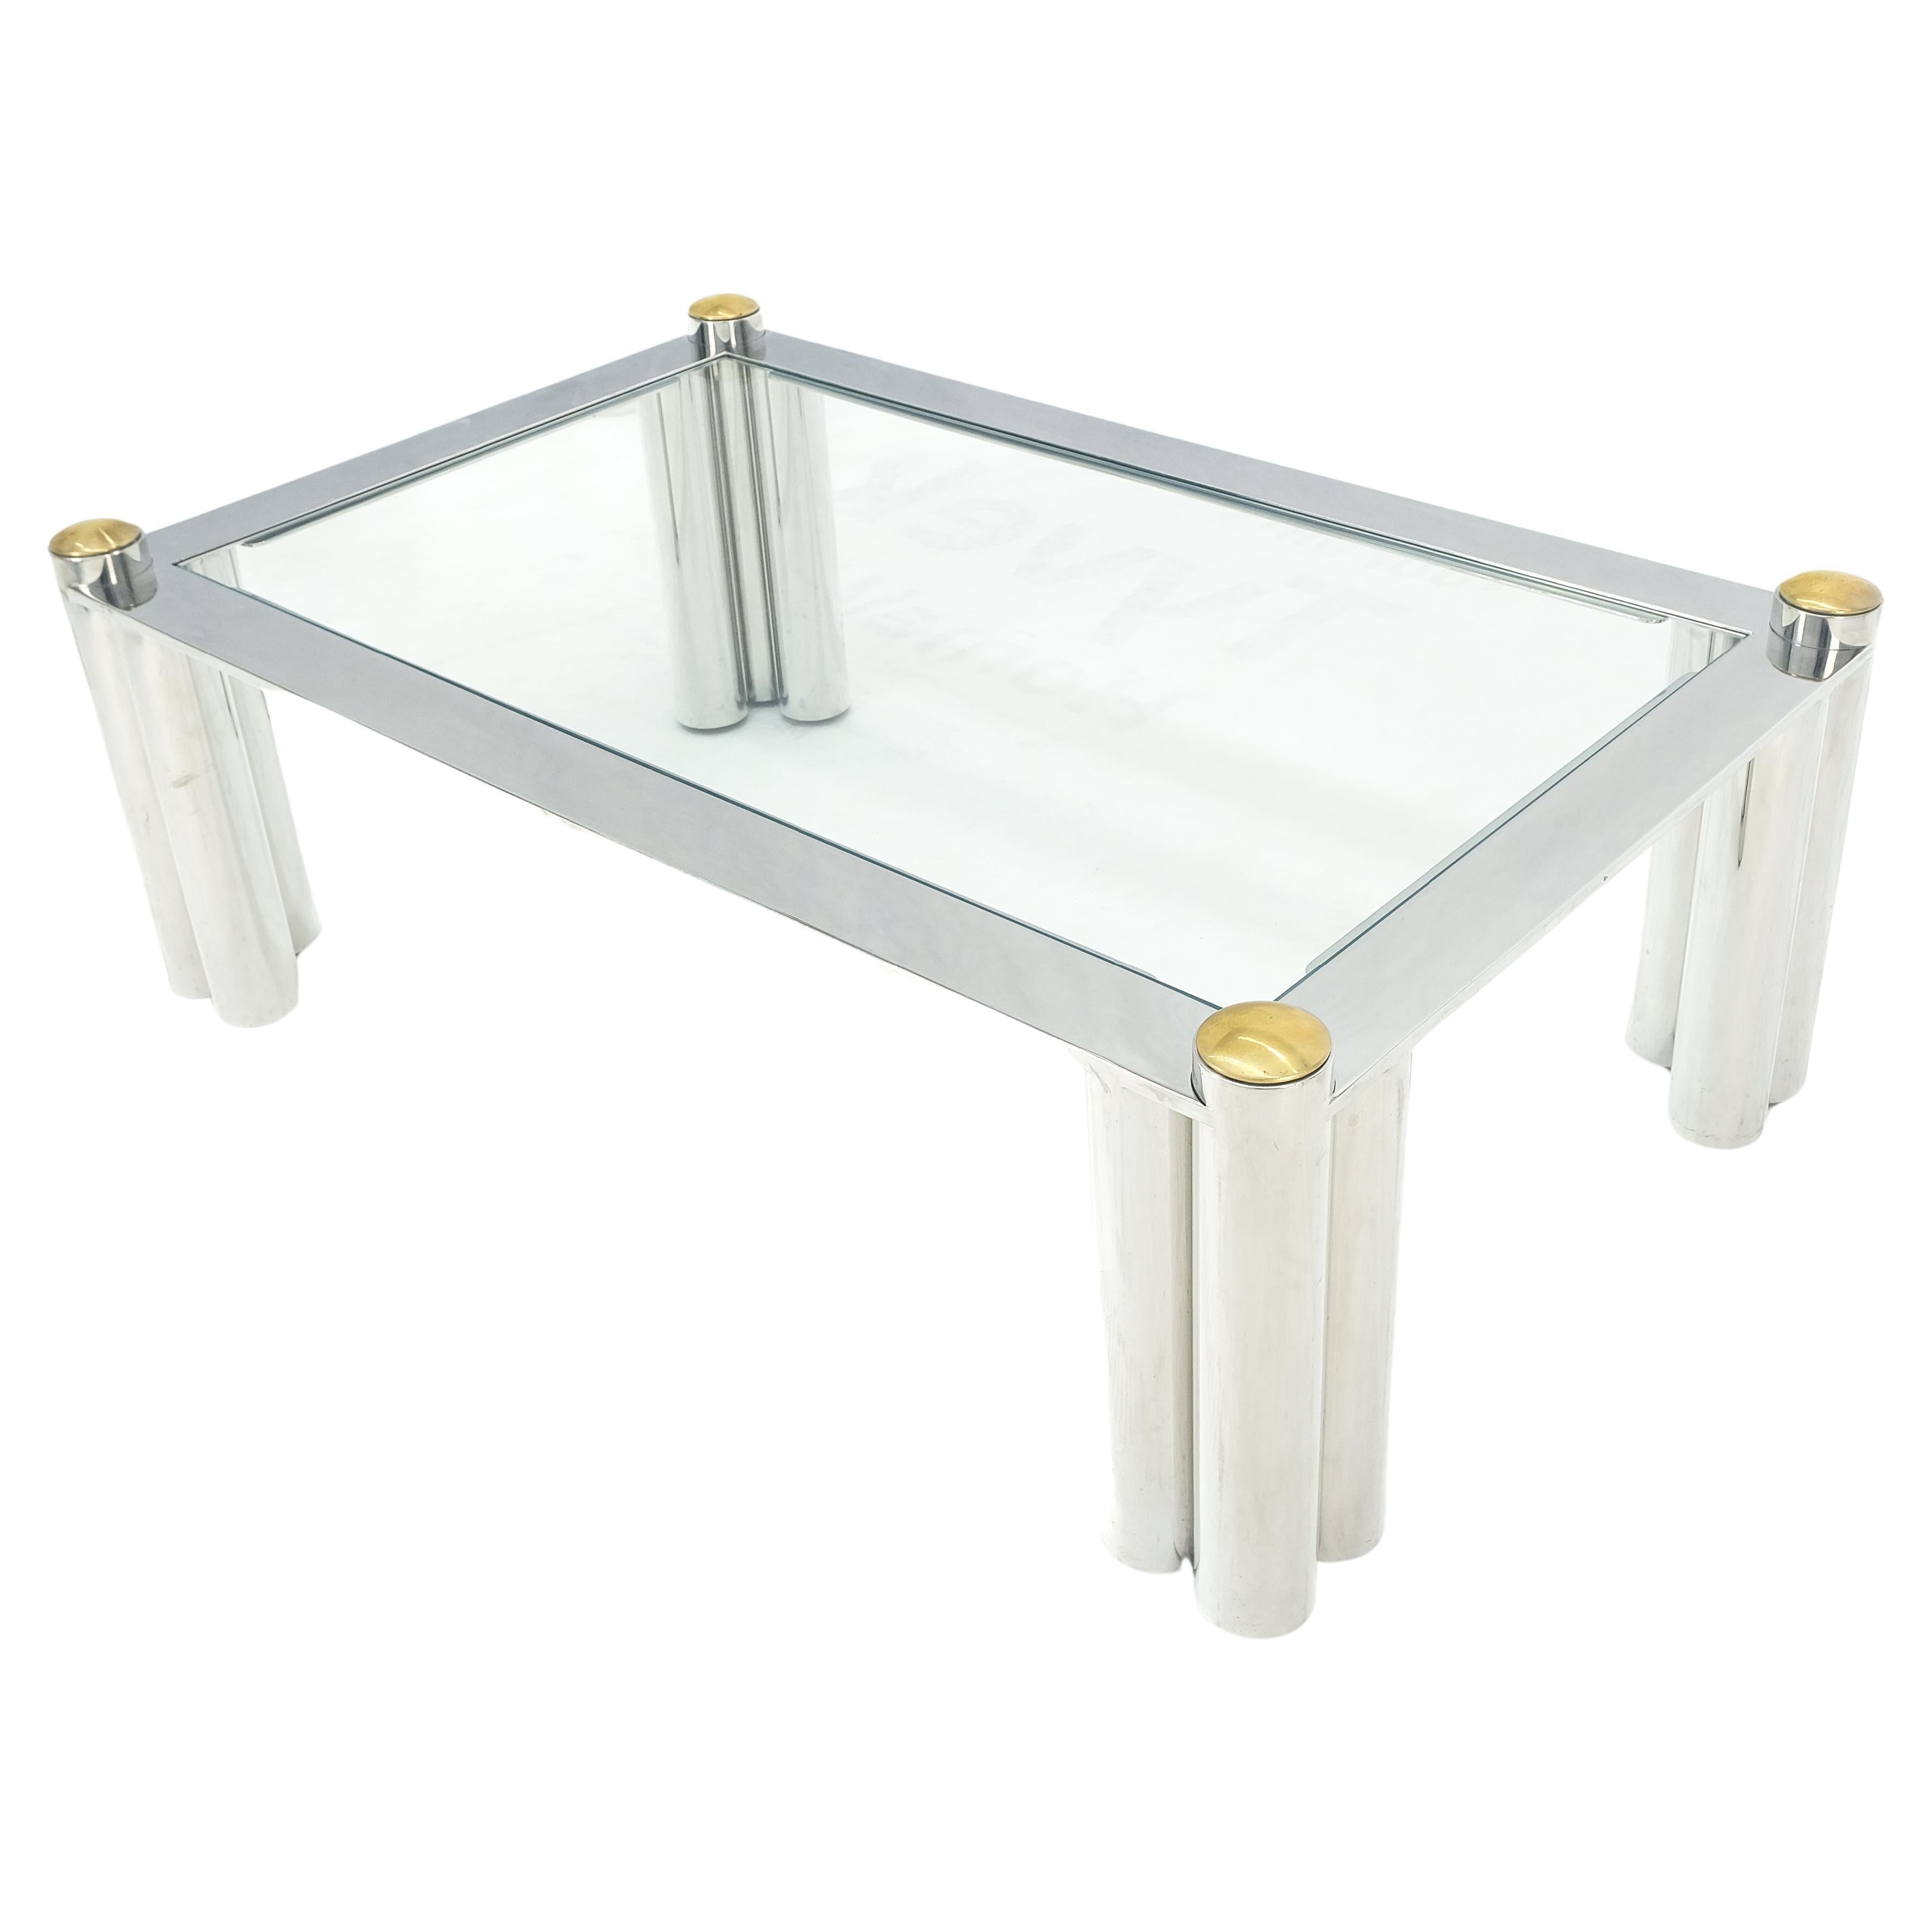 Chrome Finish Stainless Steel Triple Cylinder Leg Frame Rectangle Coffee Table  For Sale